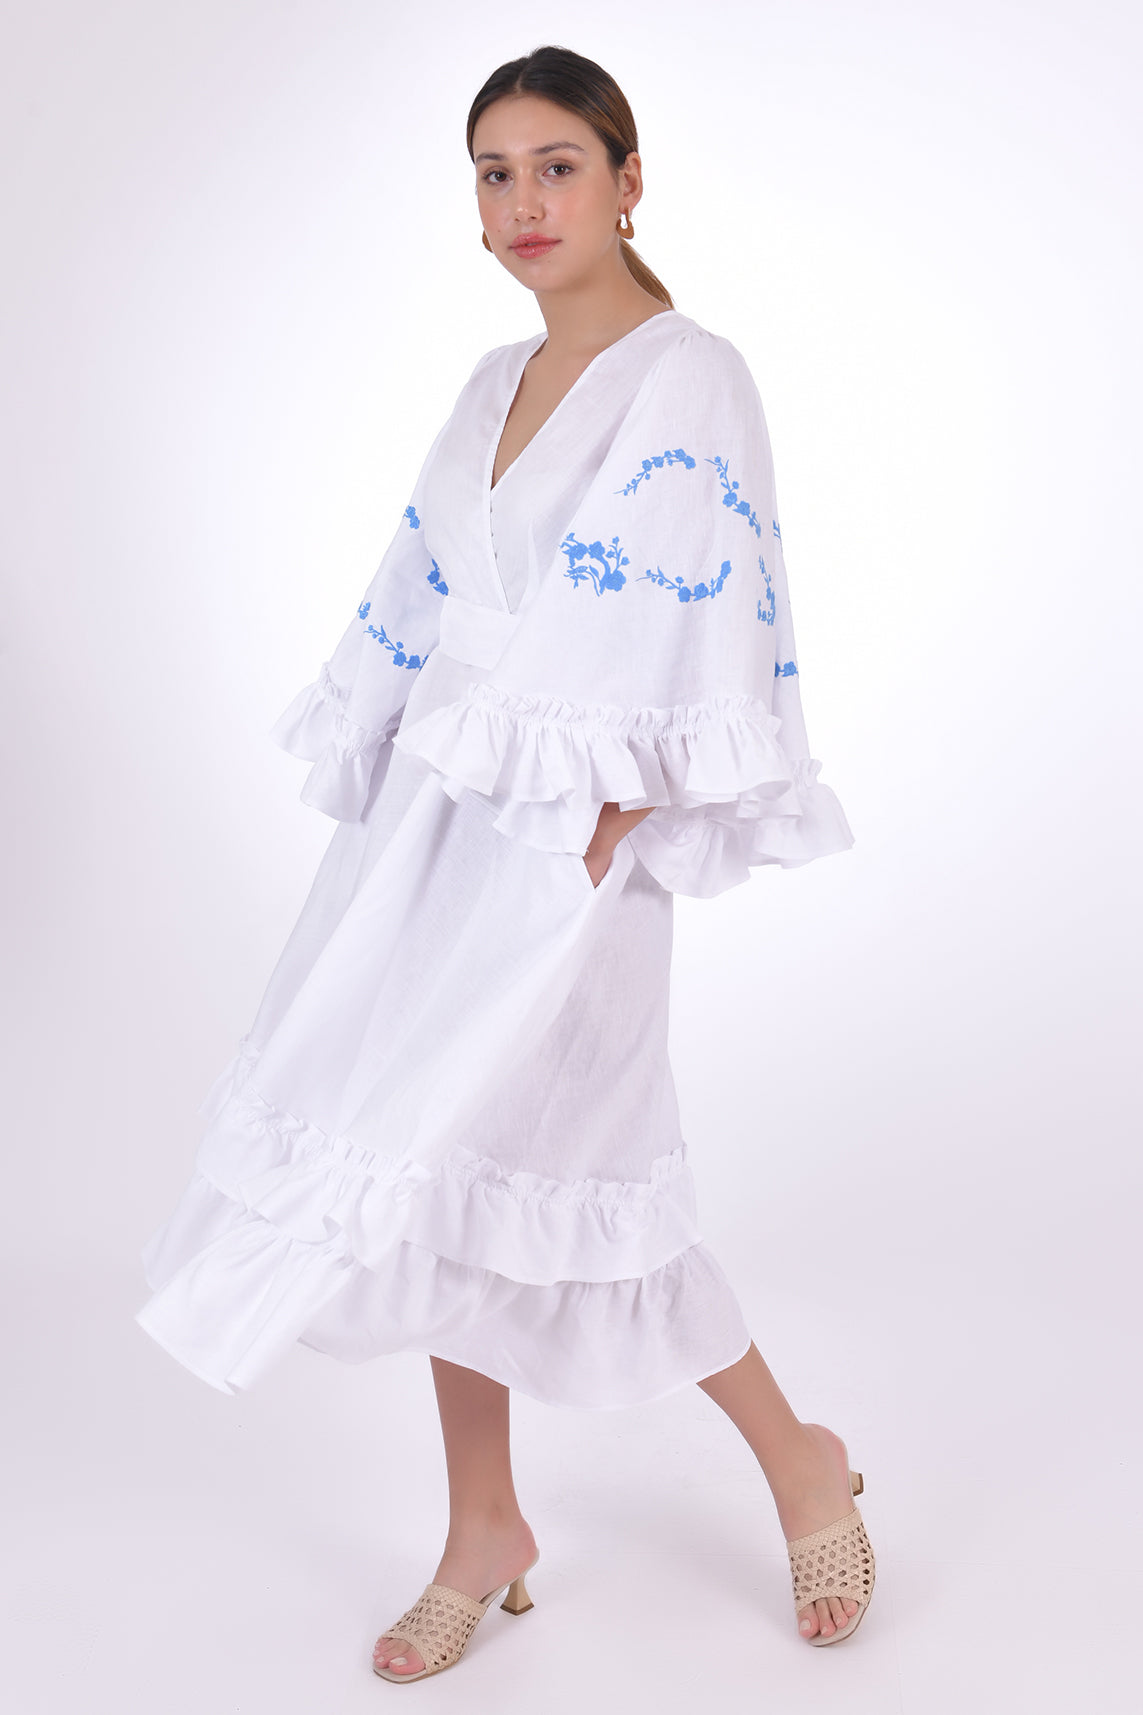 Fanm Mon Hati Linen Dress, Showcasing the movement of the Linen fabric, bell sleeves and ruffled hem. Side View.